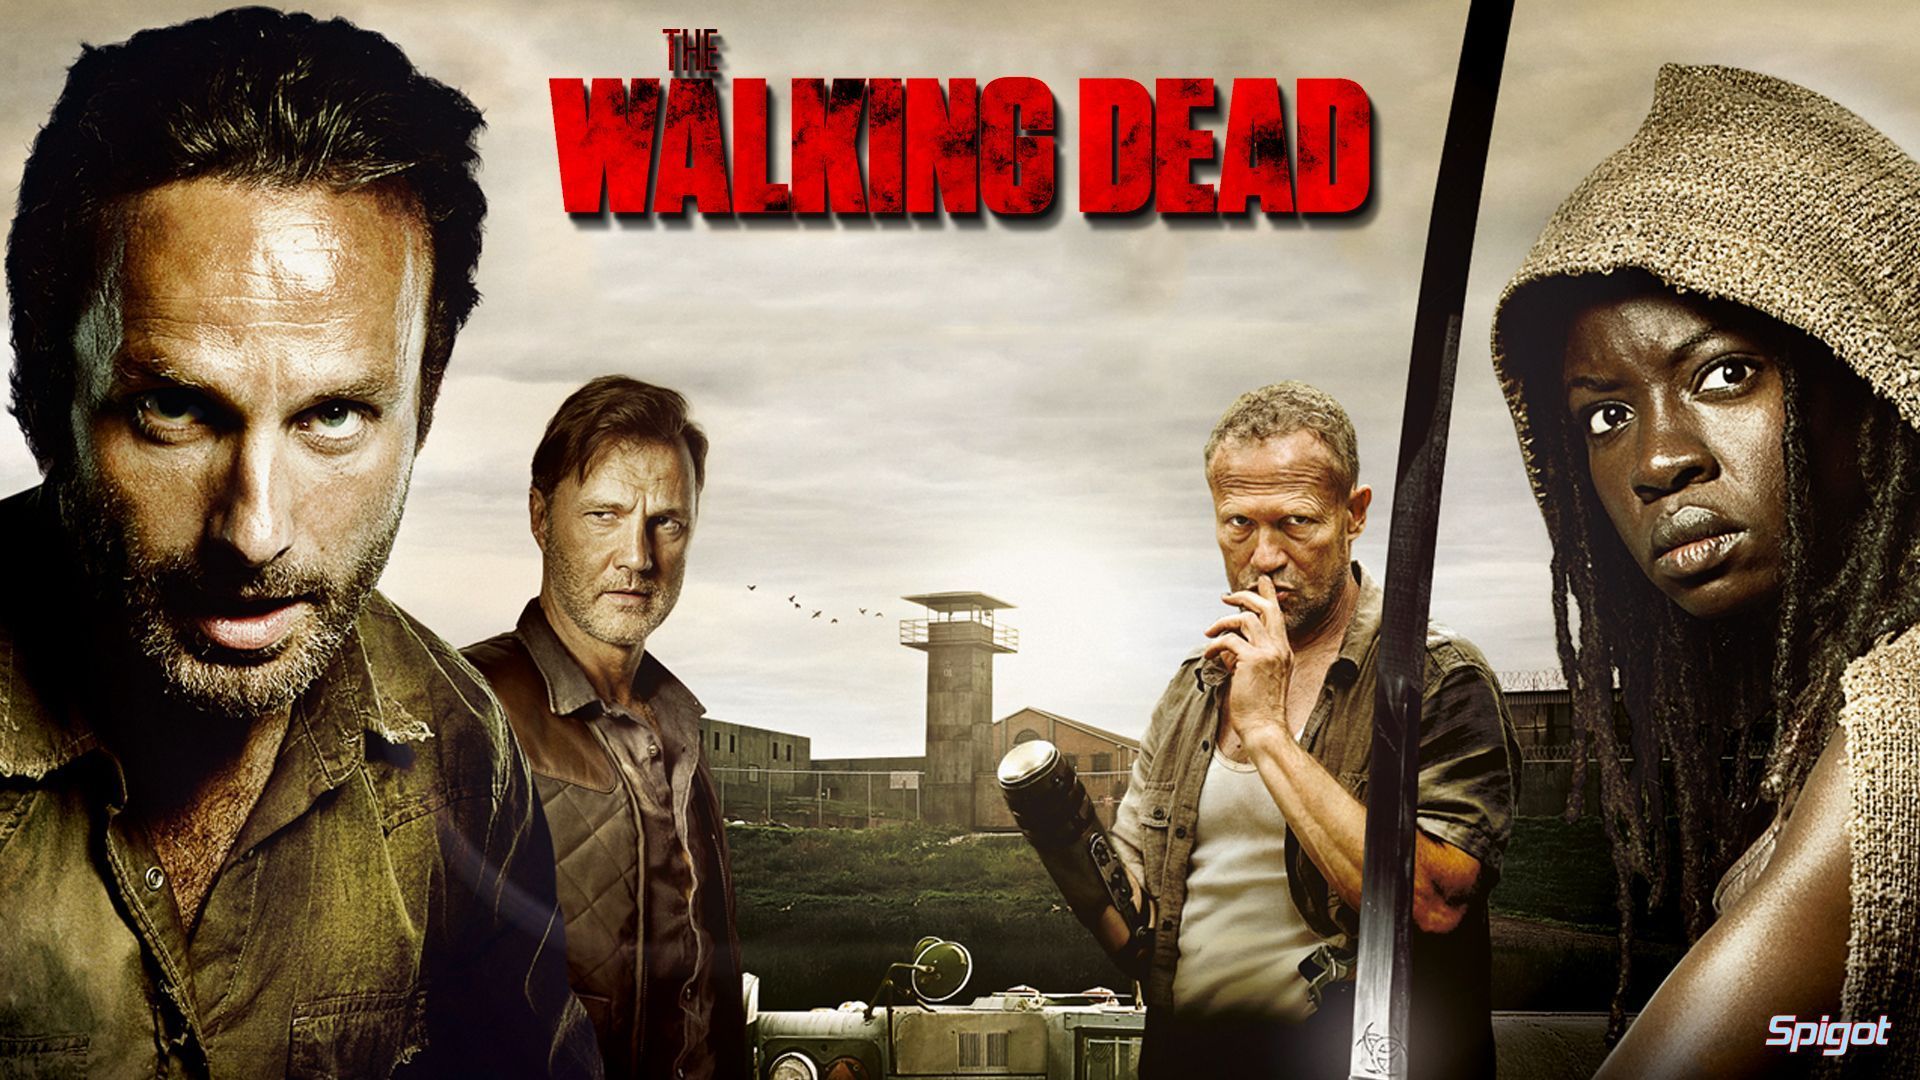 The Walking Dead #696323 | Full HD Widescreen wallpapers for ...